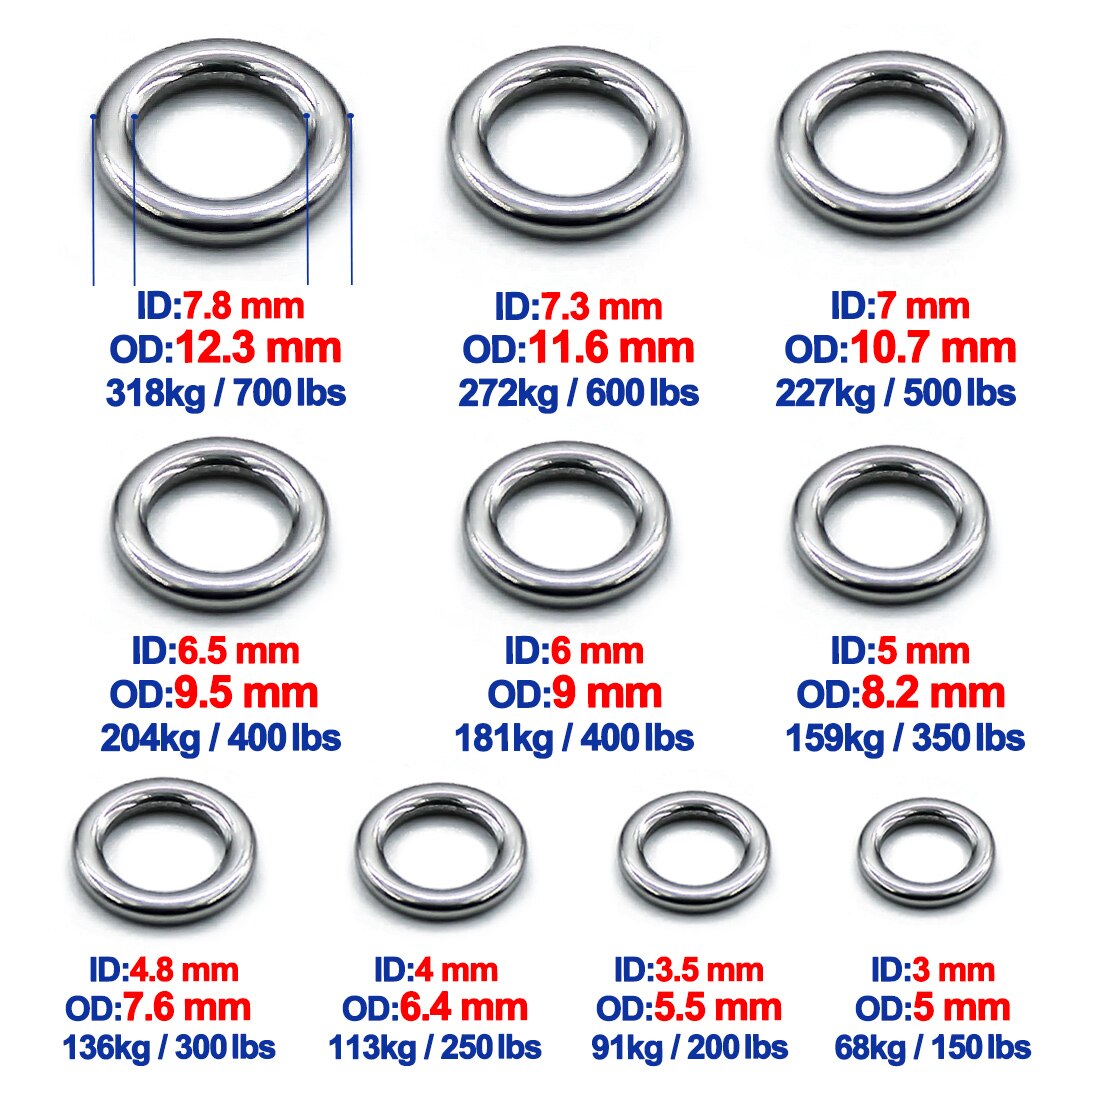 PRO BEROS 100Pcs Fishing Ring Heavy Duty Stainless Steel O-Rings for  Rigging Worms Stickbaits Jigging Saltwater Lures Connectors